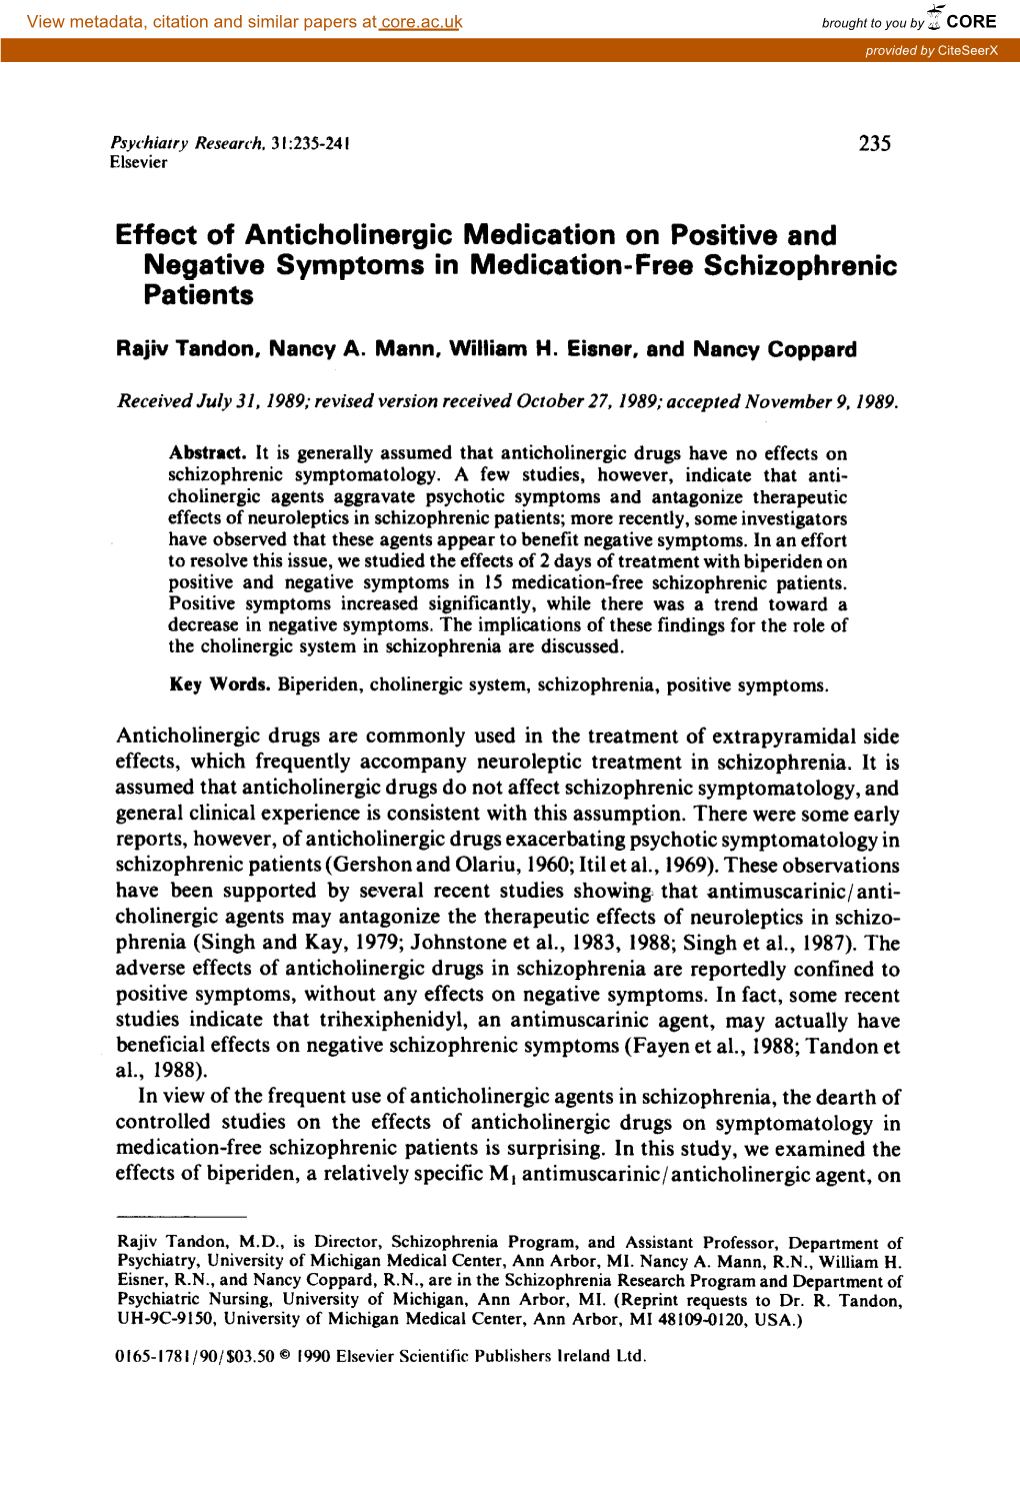 Effect of Anticholinergic Medication on Positive and Negative Symptoms in Medication-Free Schizophrenic Patients